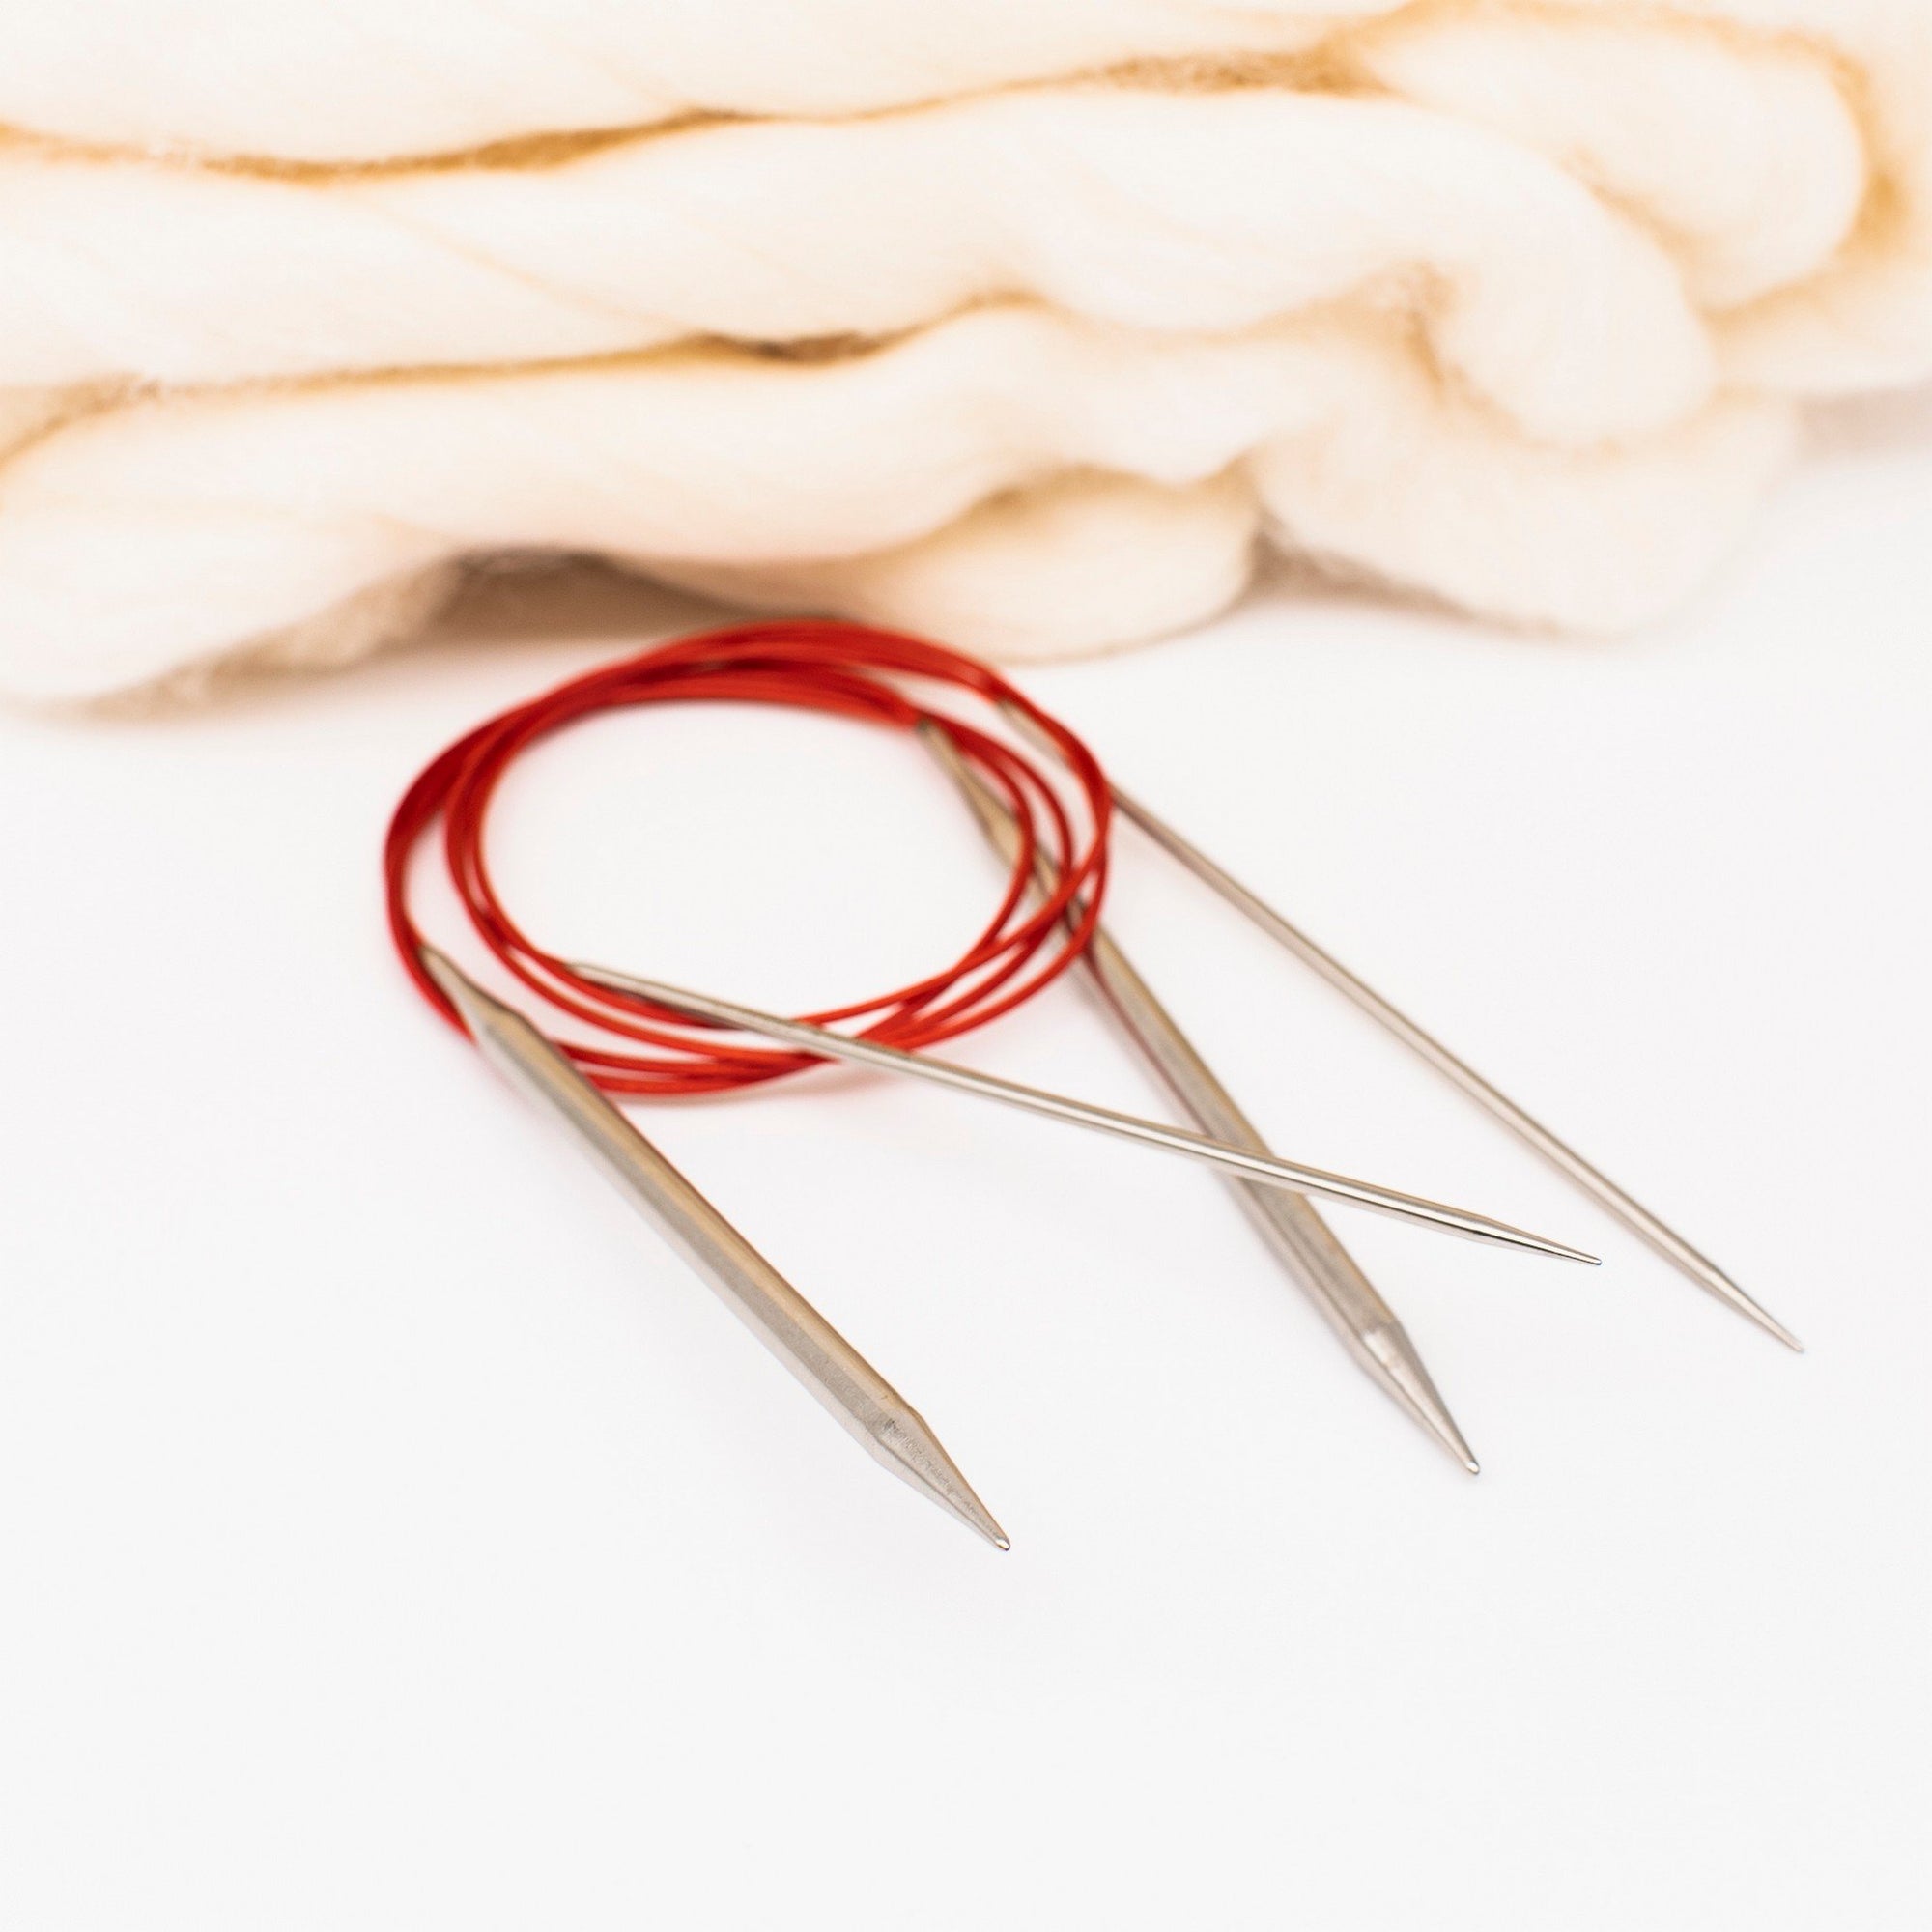 ChiaoGoo RED LACE Fixed Circular Needle - 150 cm - 2 mm ✓ Wollerei